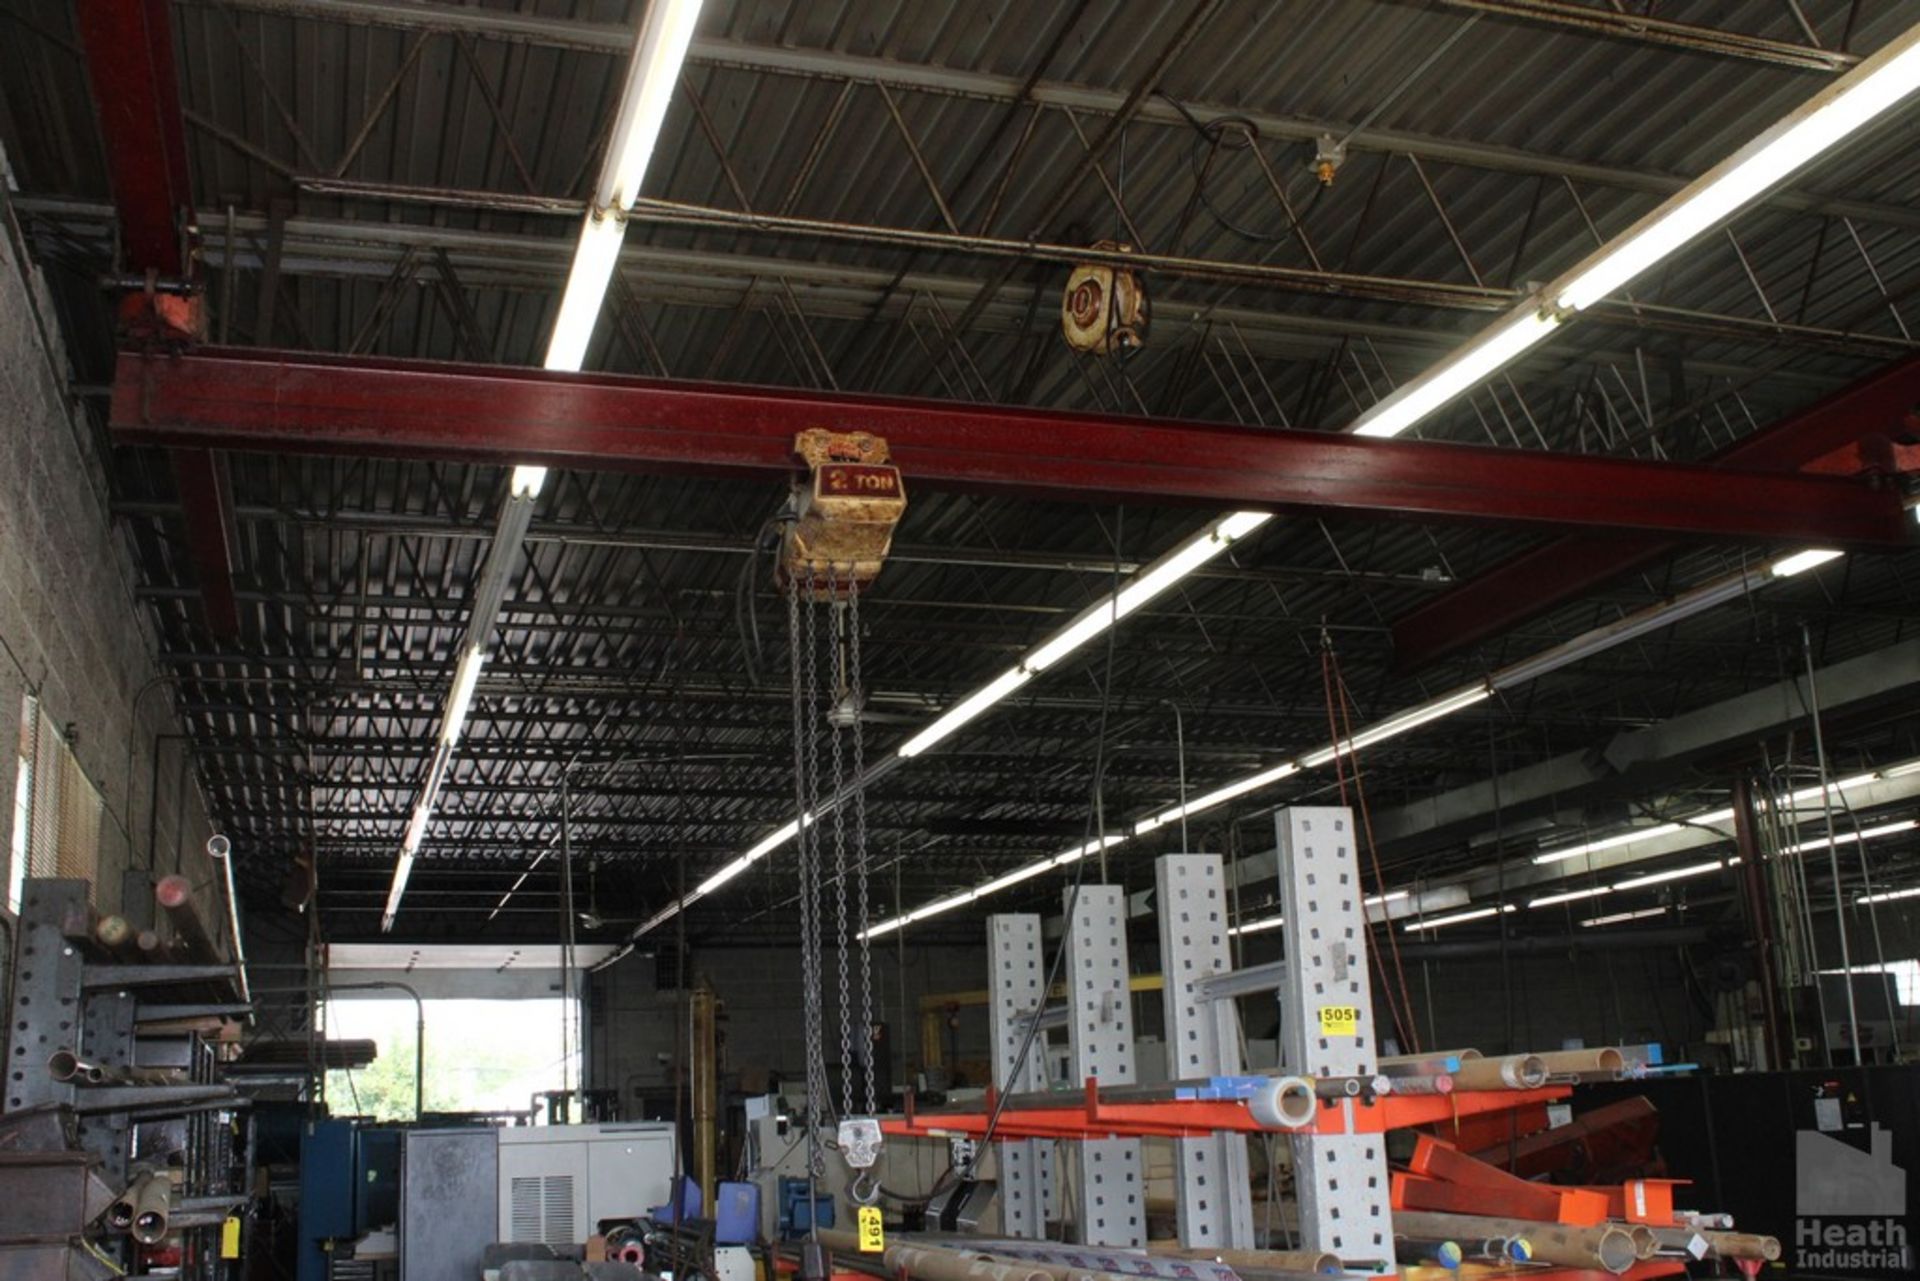 2 TON BRIDGE CRANE APPROXIMATELY 29' L X 19' 6" W INCLUDES TWO IBEAM TRACKS APPROXIMATELY 29' LONG